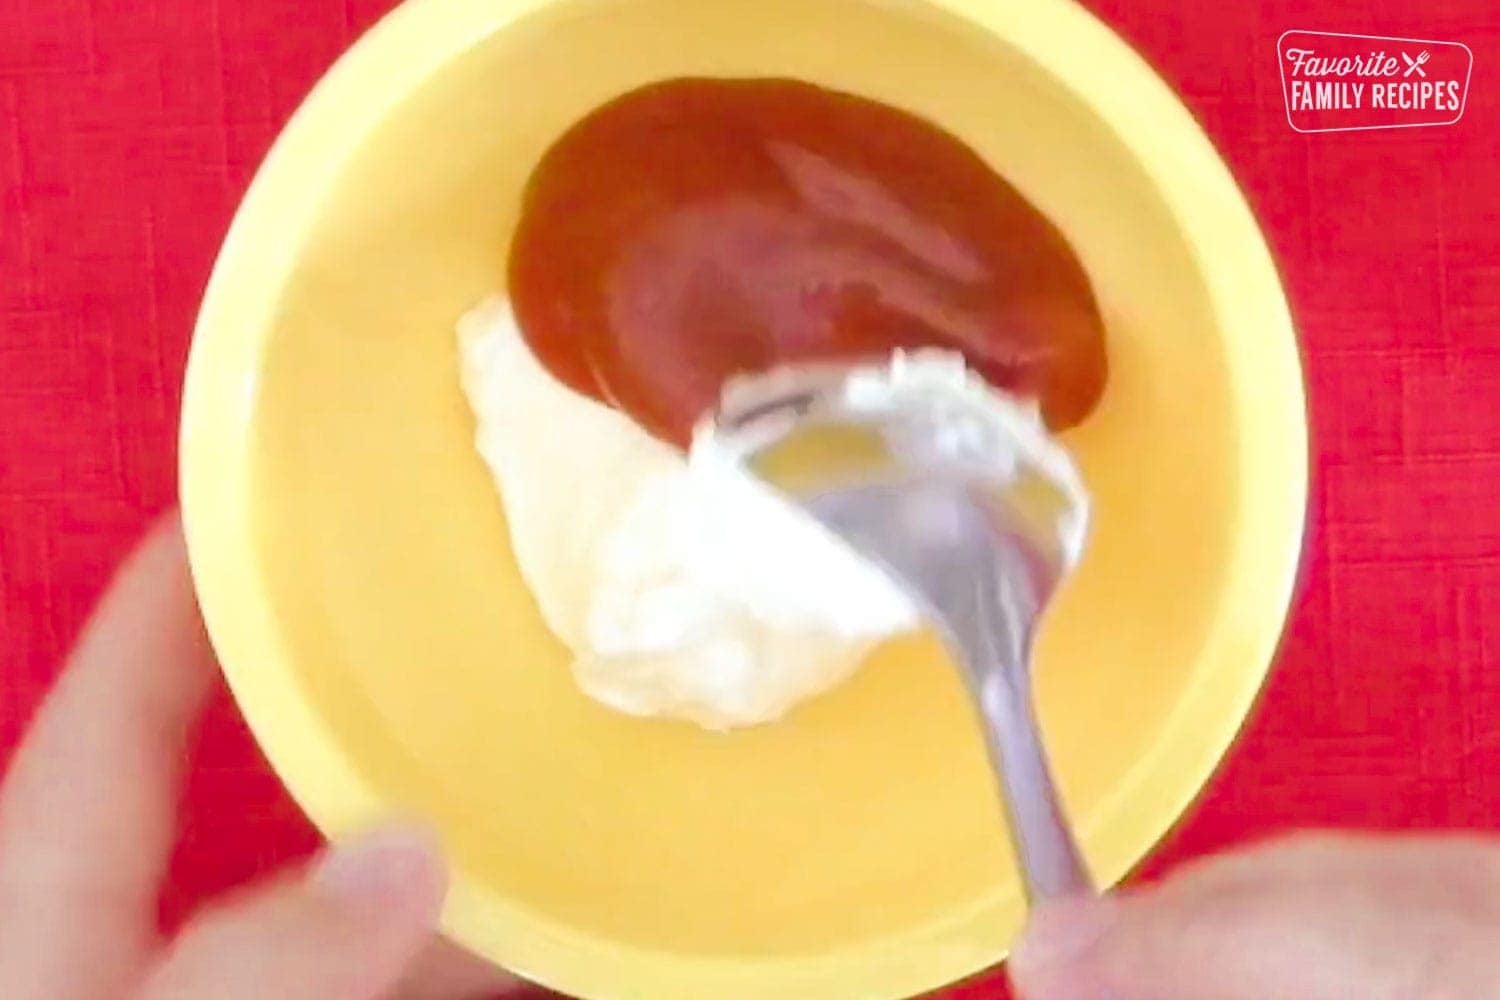 Mixing together ketchup and mayo fro fry sauce